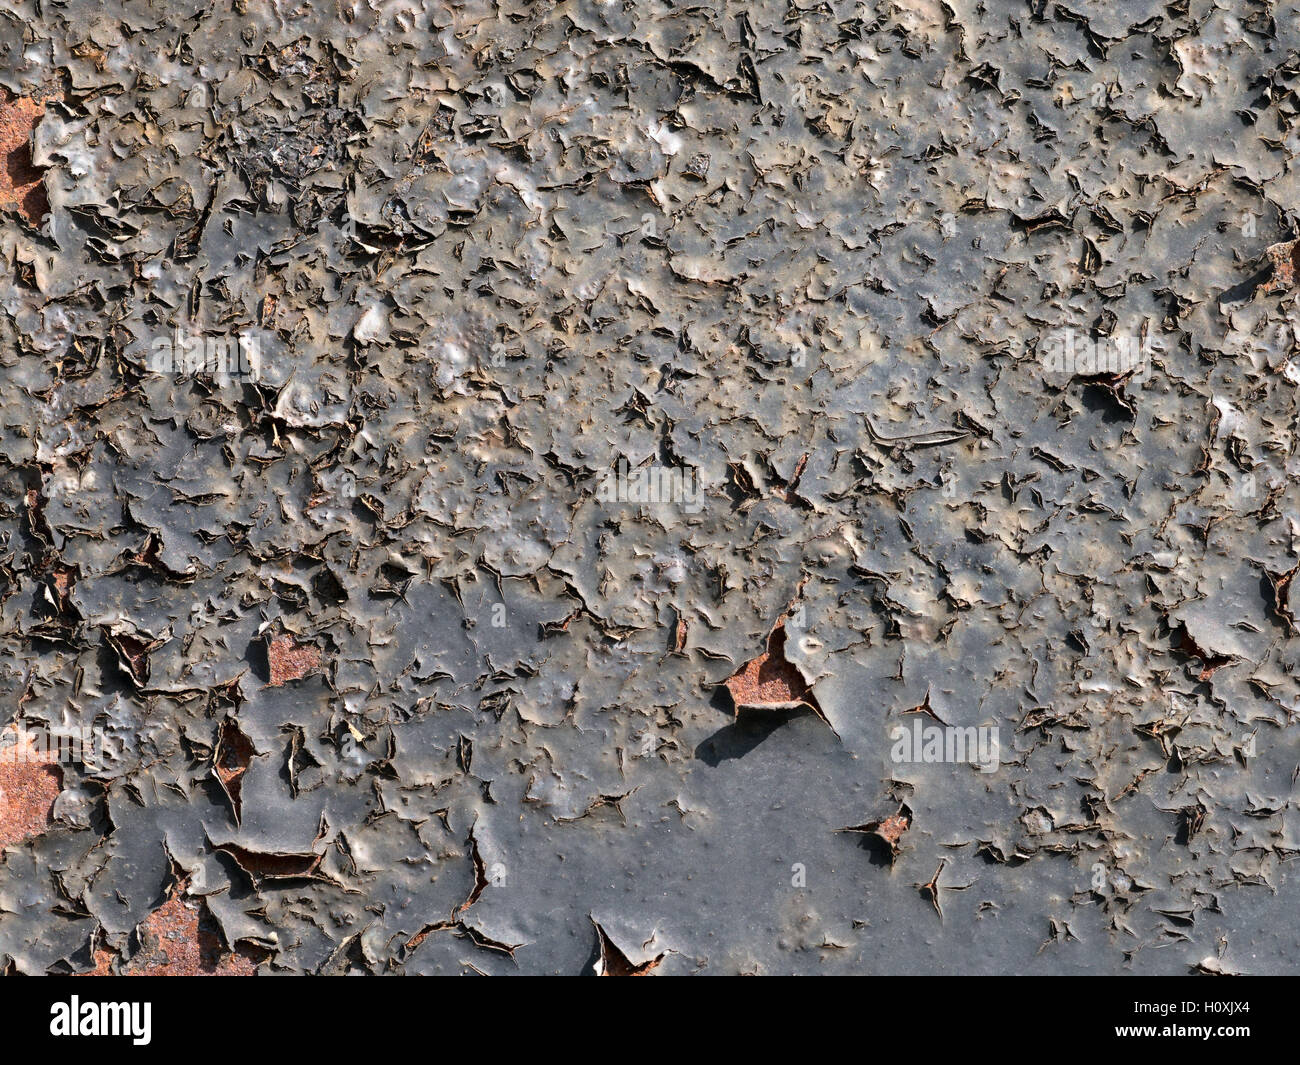 Black peeling paint on a rusty surface. close up texture detail. Stock Photo